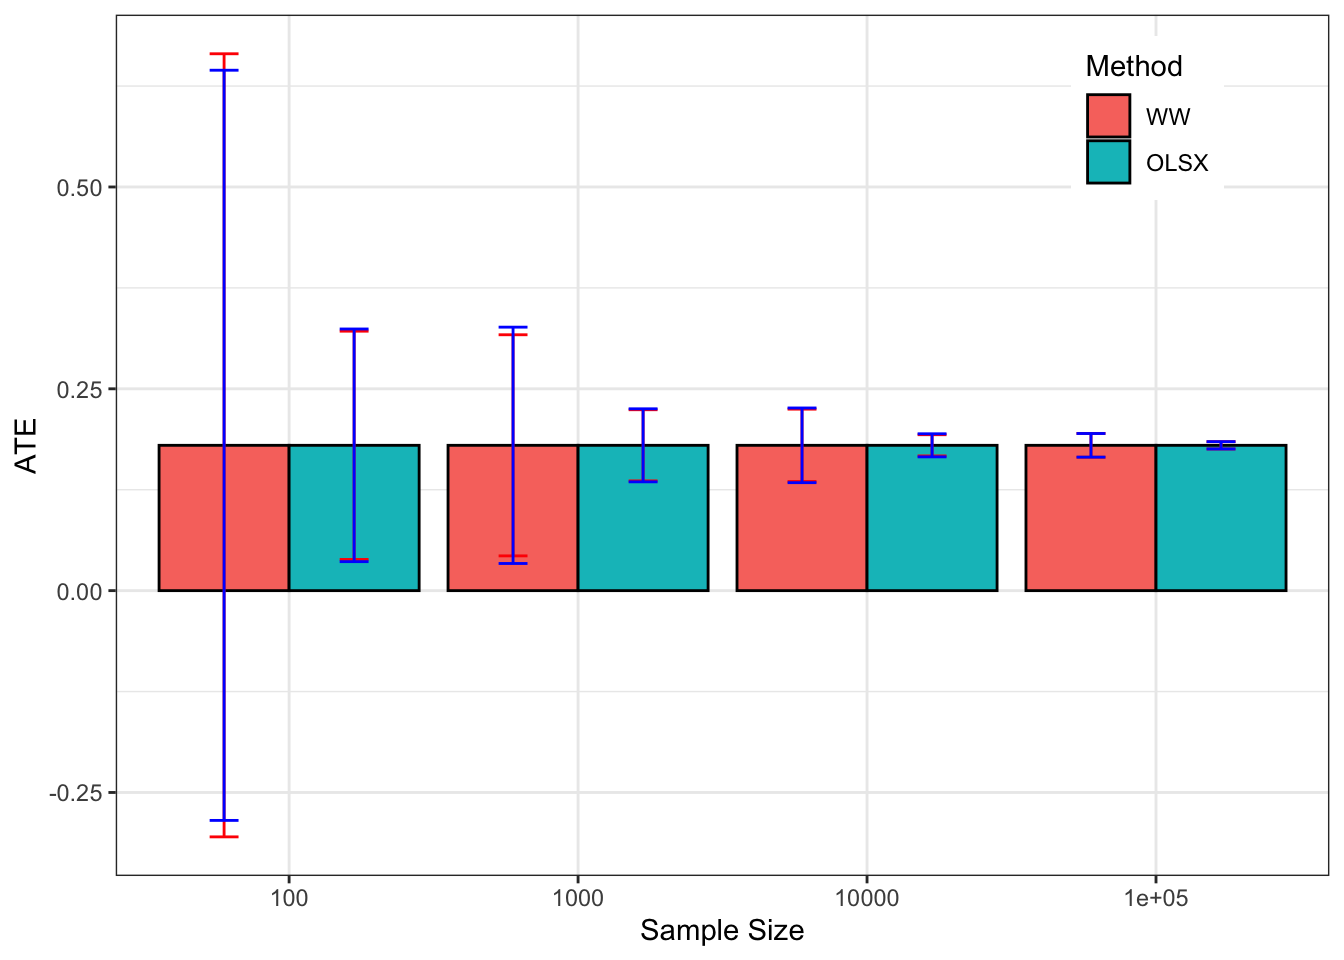 Average CLT-based approximations of sampling noise in the Brute Force design for $WW$ and $OLSX$ over replications of samples of different sizes (true sampling noise in red)